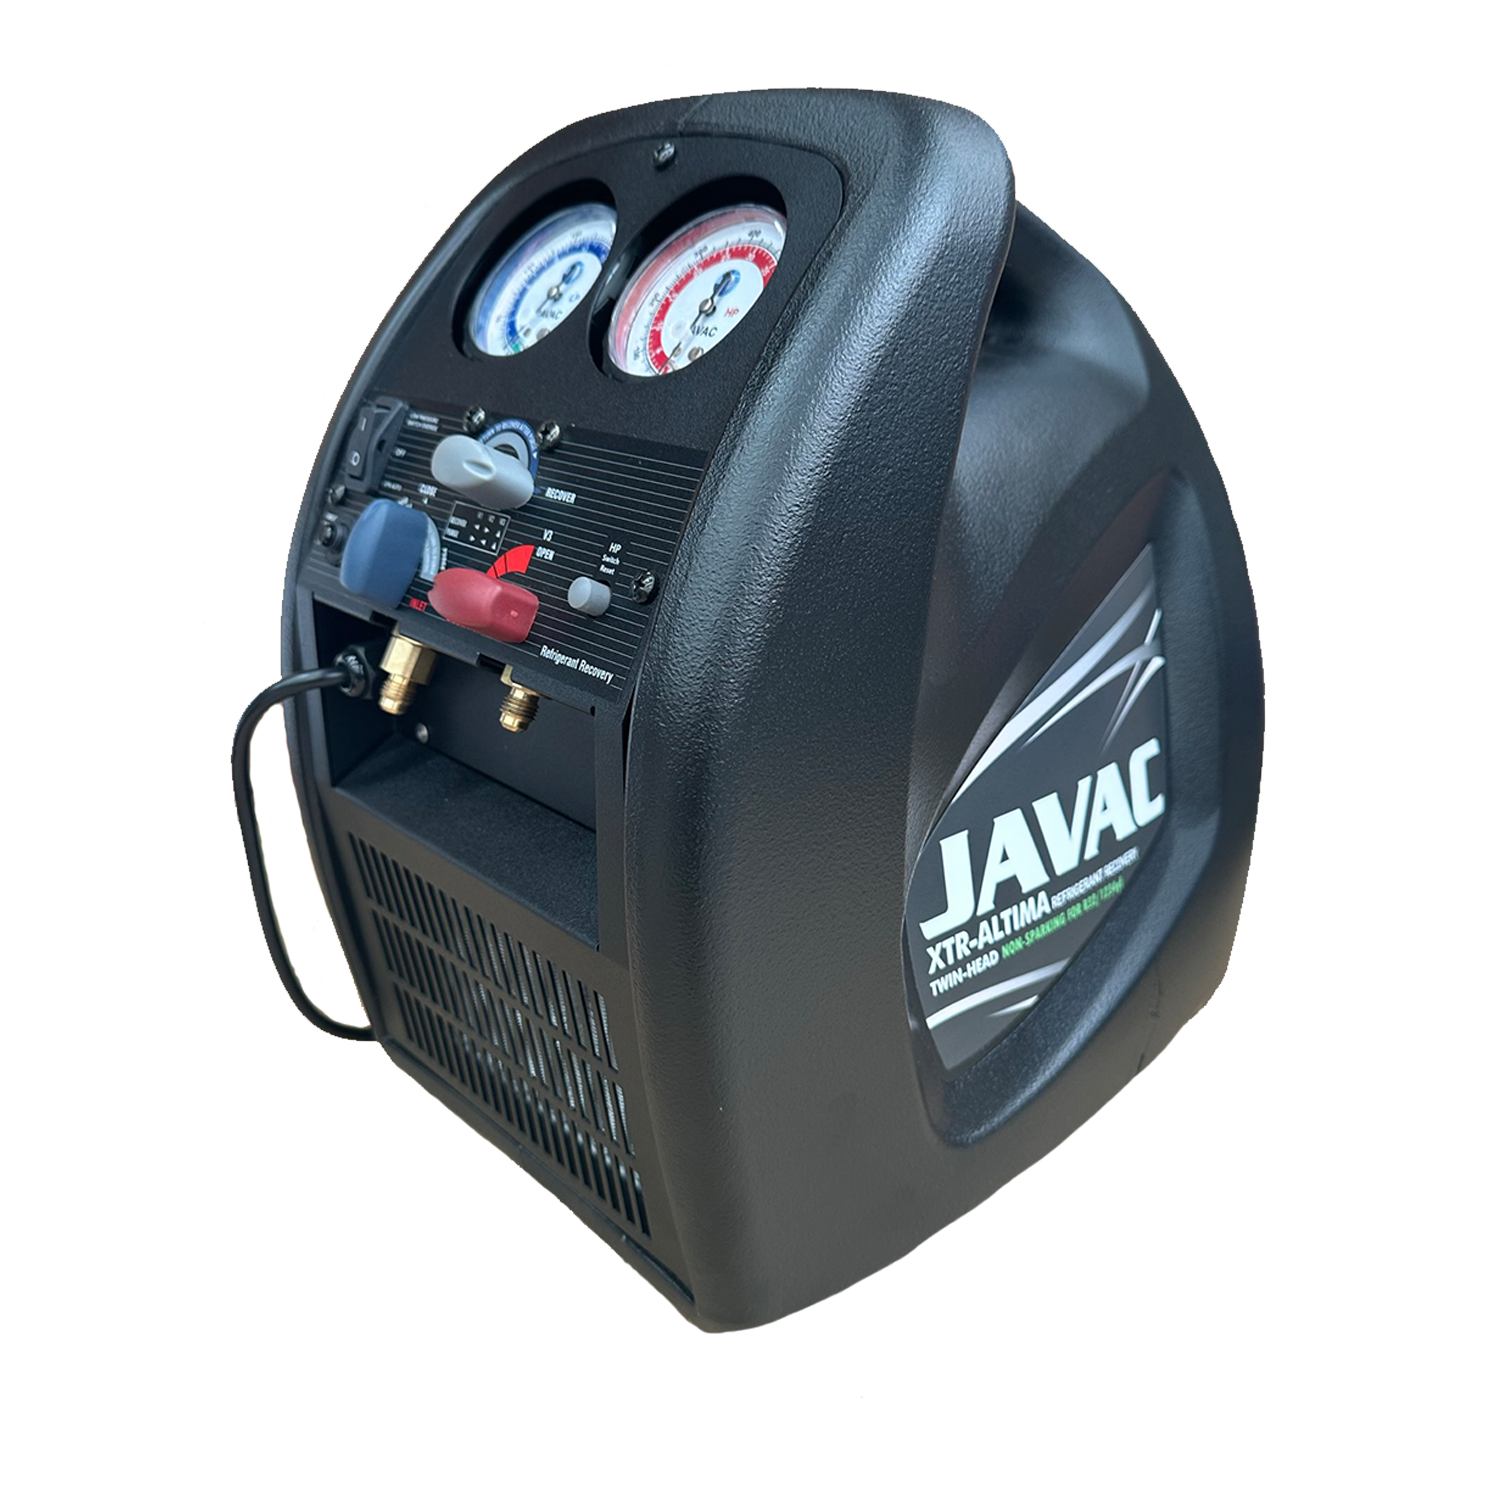 JAVAC XTR ALTIMA Recovery Machine - Non-Sparking -  R32, R410a, R134a Compliant